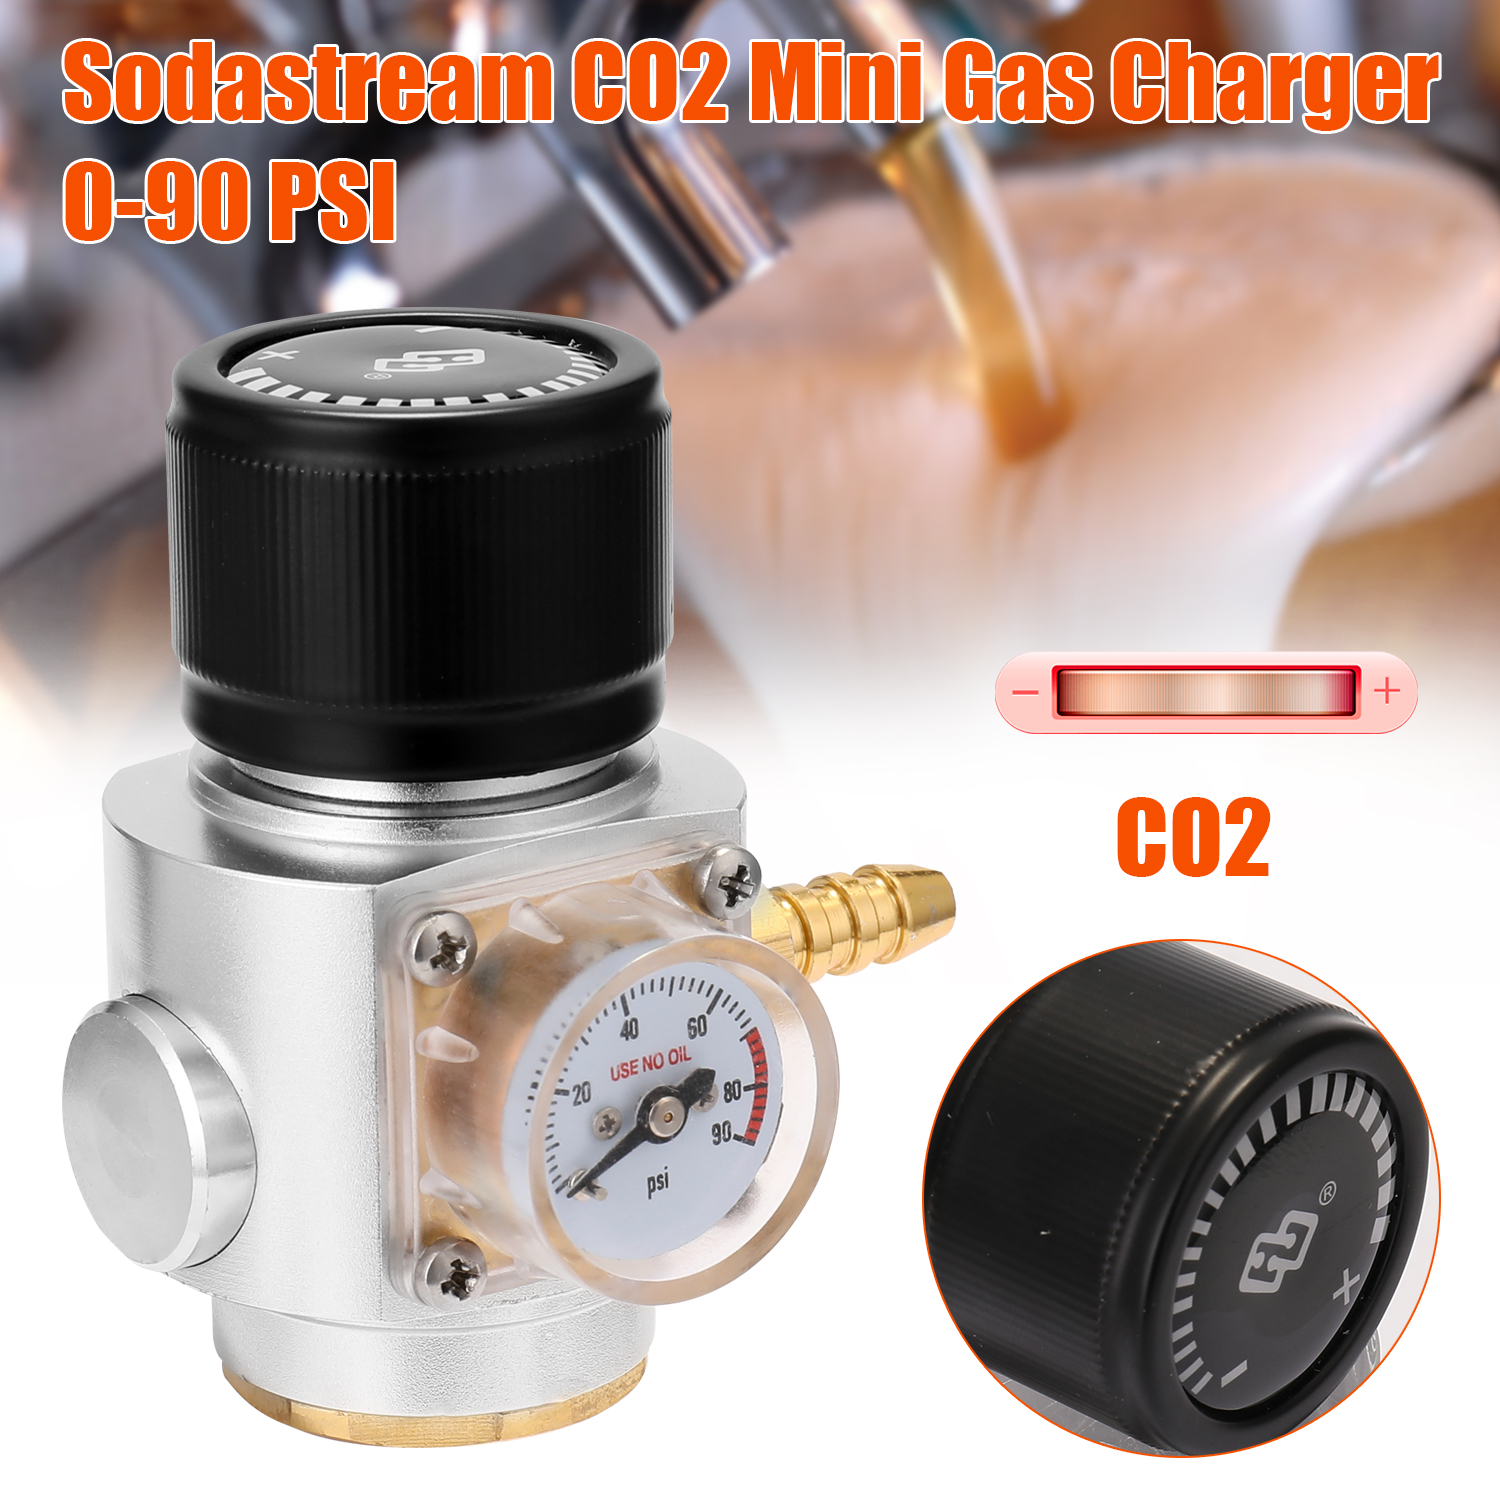 Sodastream CO2 Mini Gas Charger 0-90 PSI Gauge for Soda Water Beer Kegerator